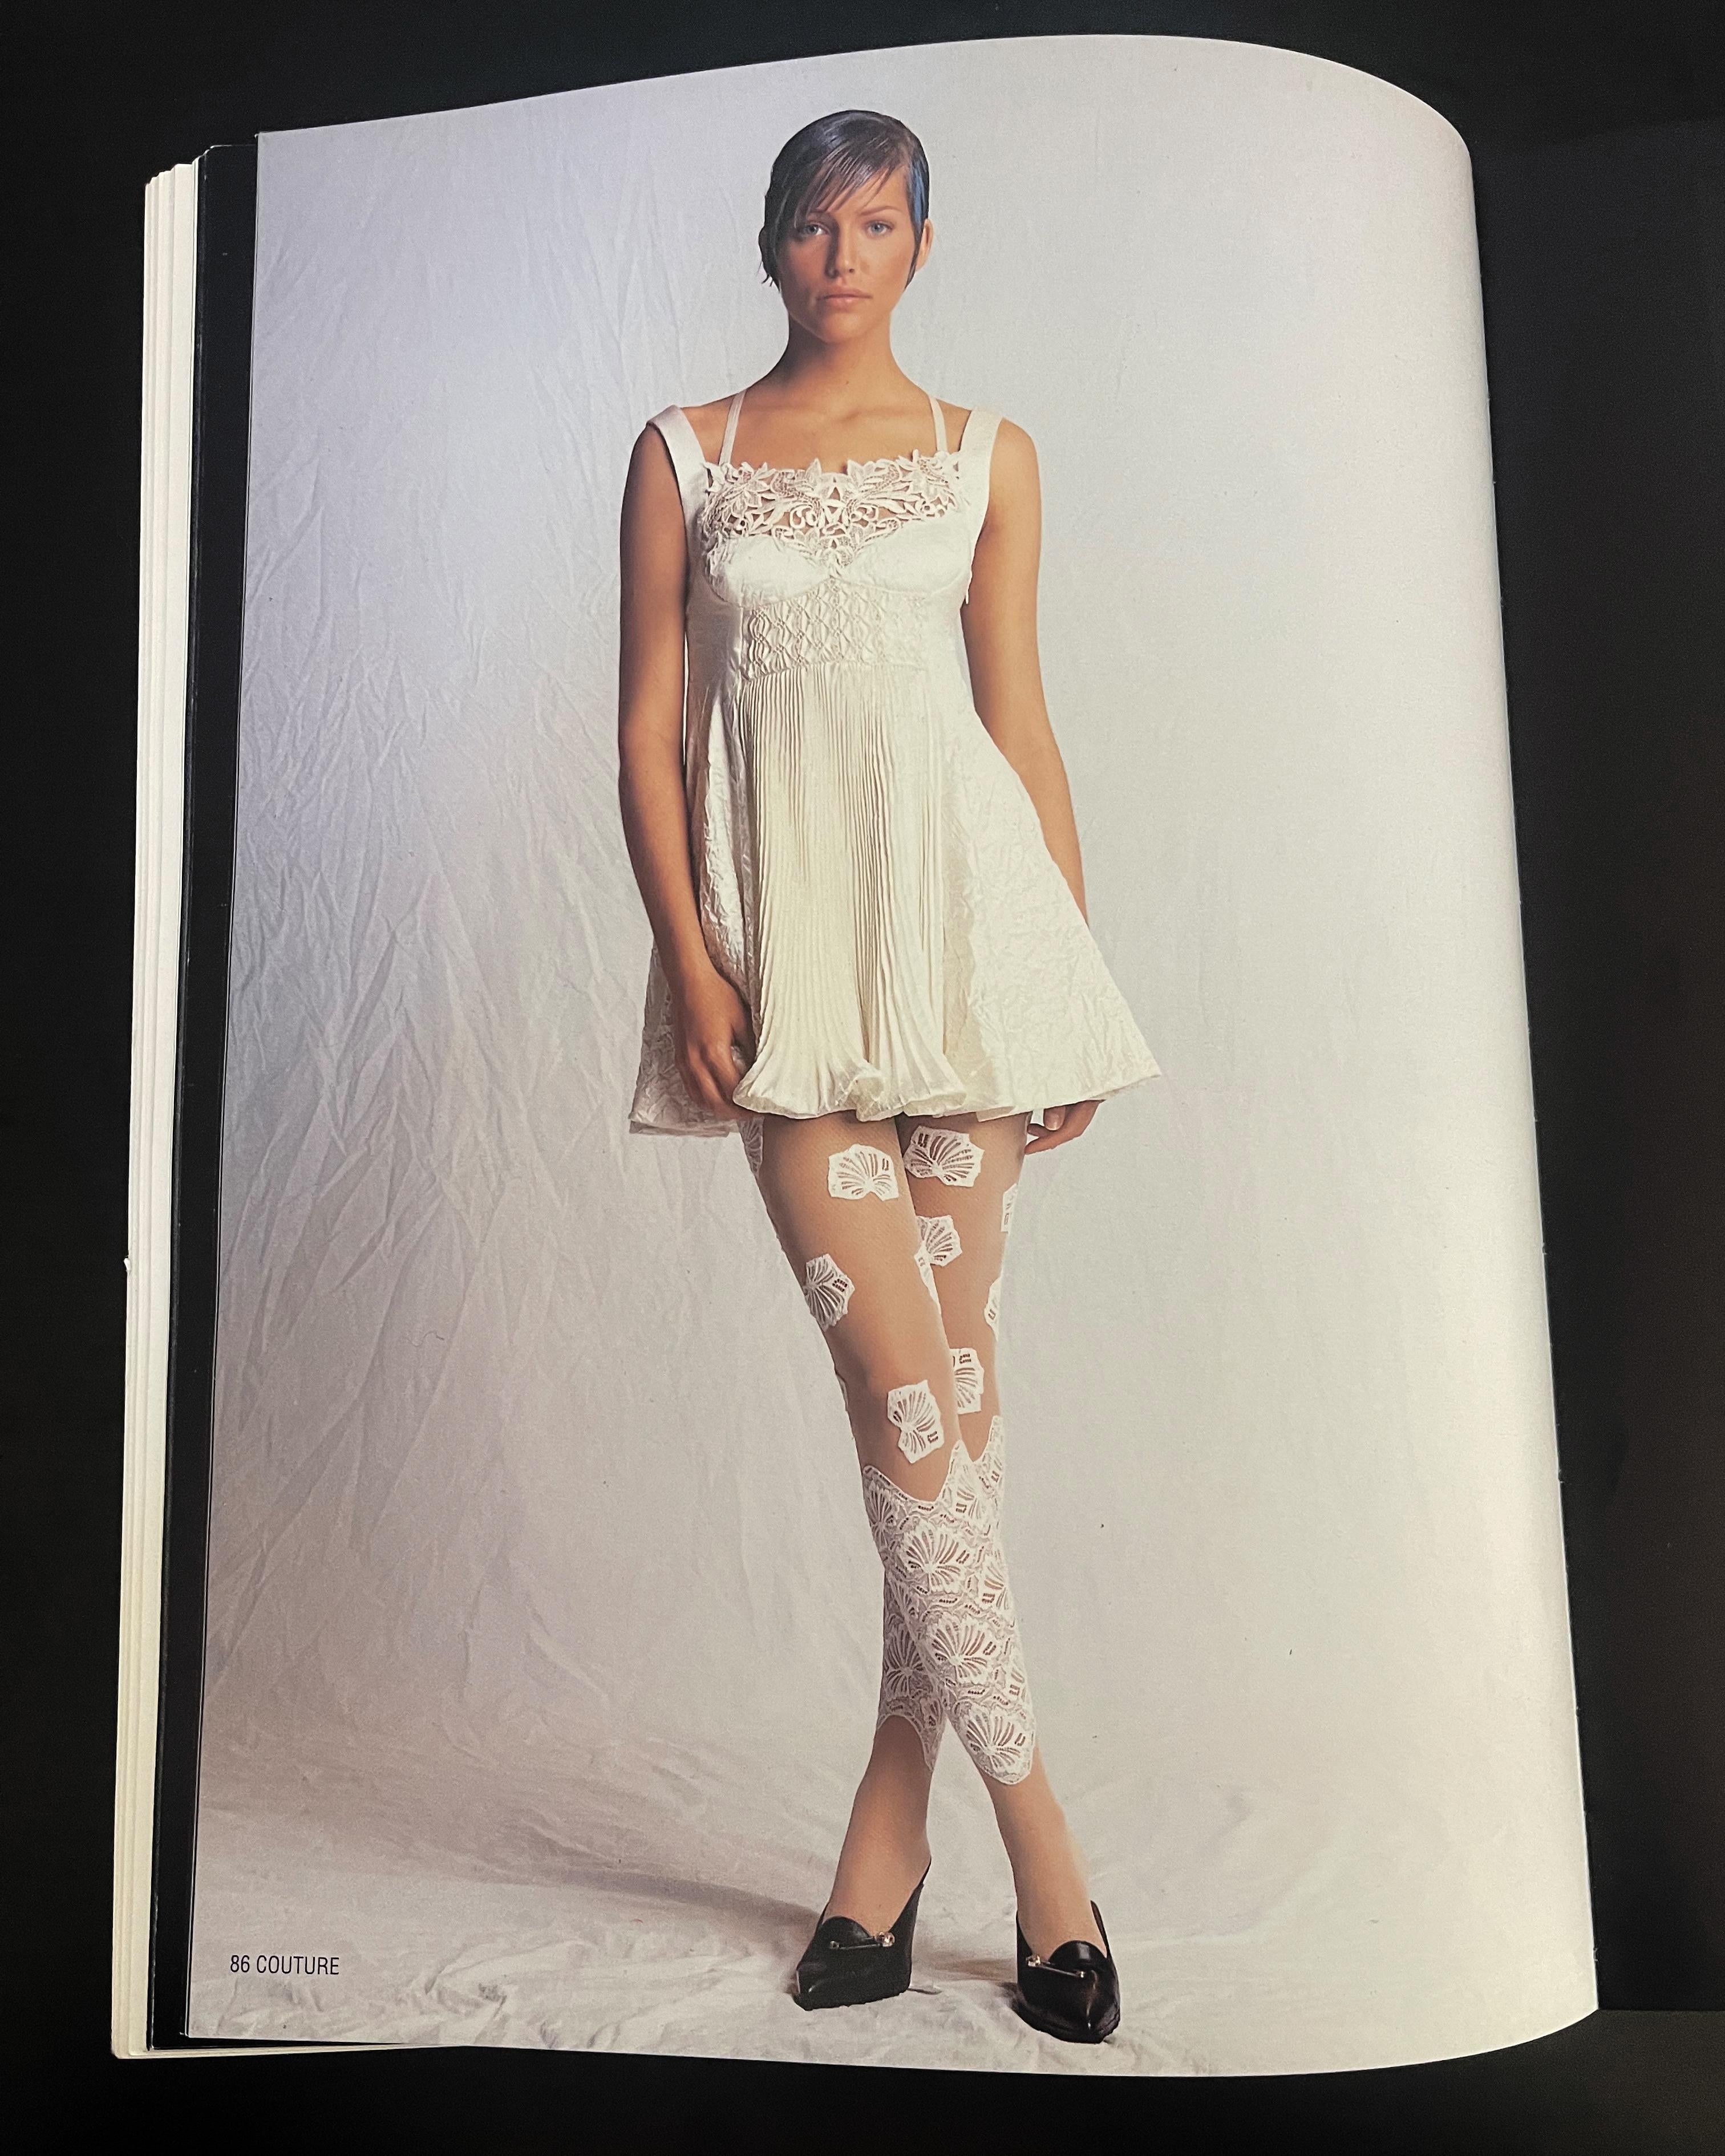 S/S 1994 Gianni Versace ecru micro mini slip dress. Silk and lace off-white dress with full front pleated skirt. Fitted waist and honeycomb under-bust structure with embellished mini white beaded details. Concealed side zip closure and nude silk